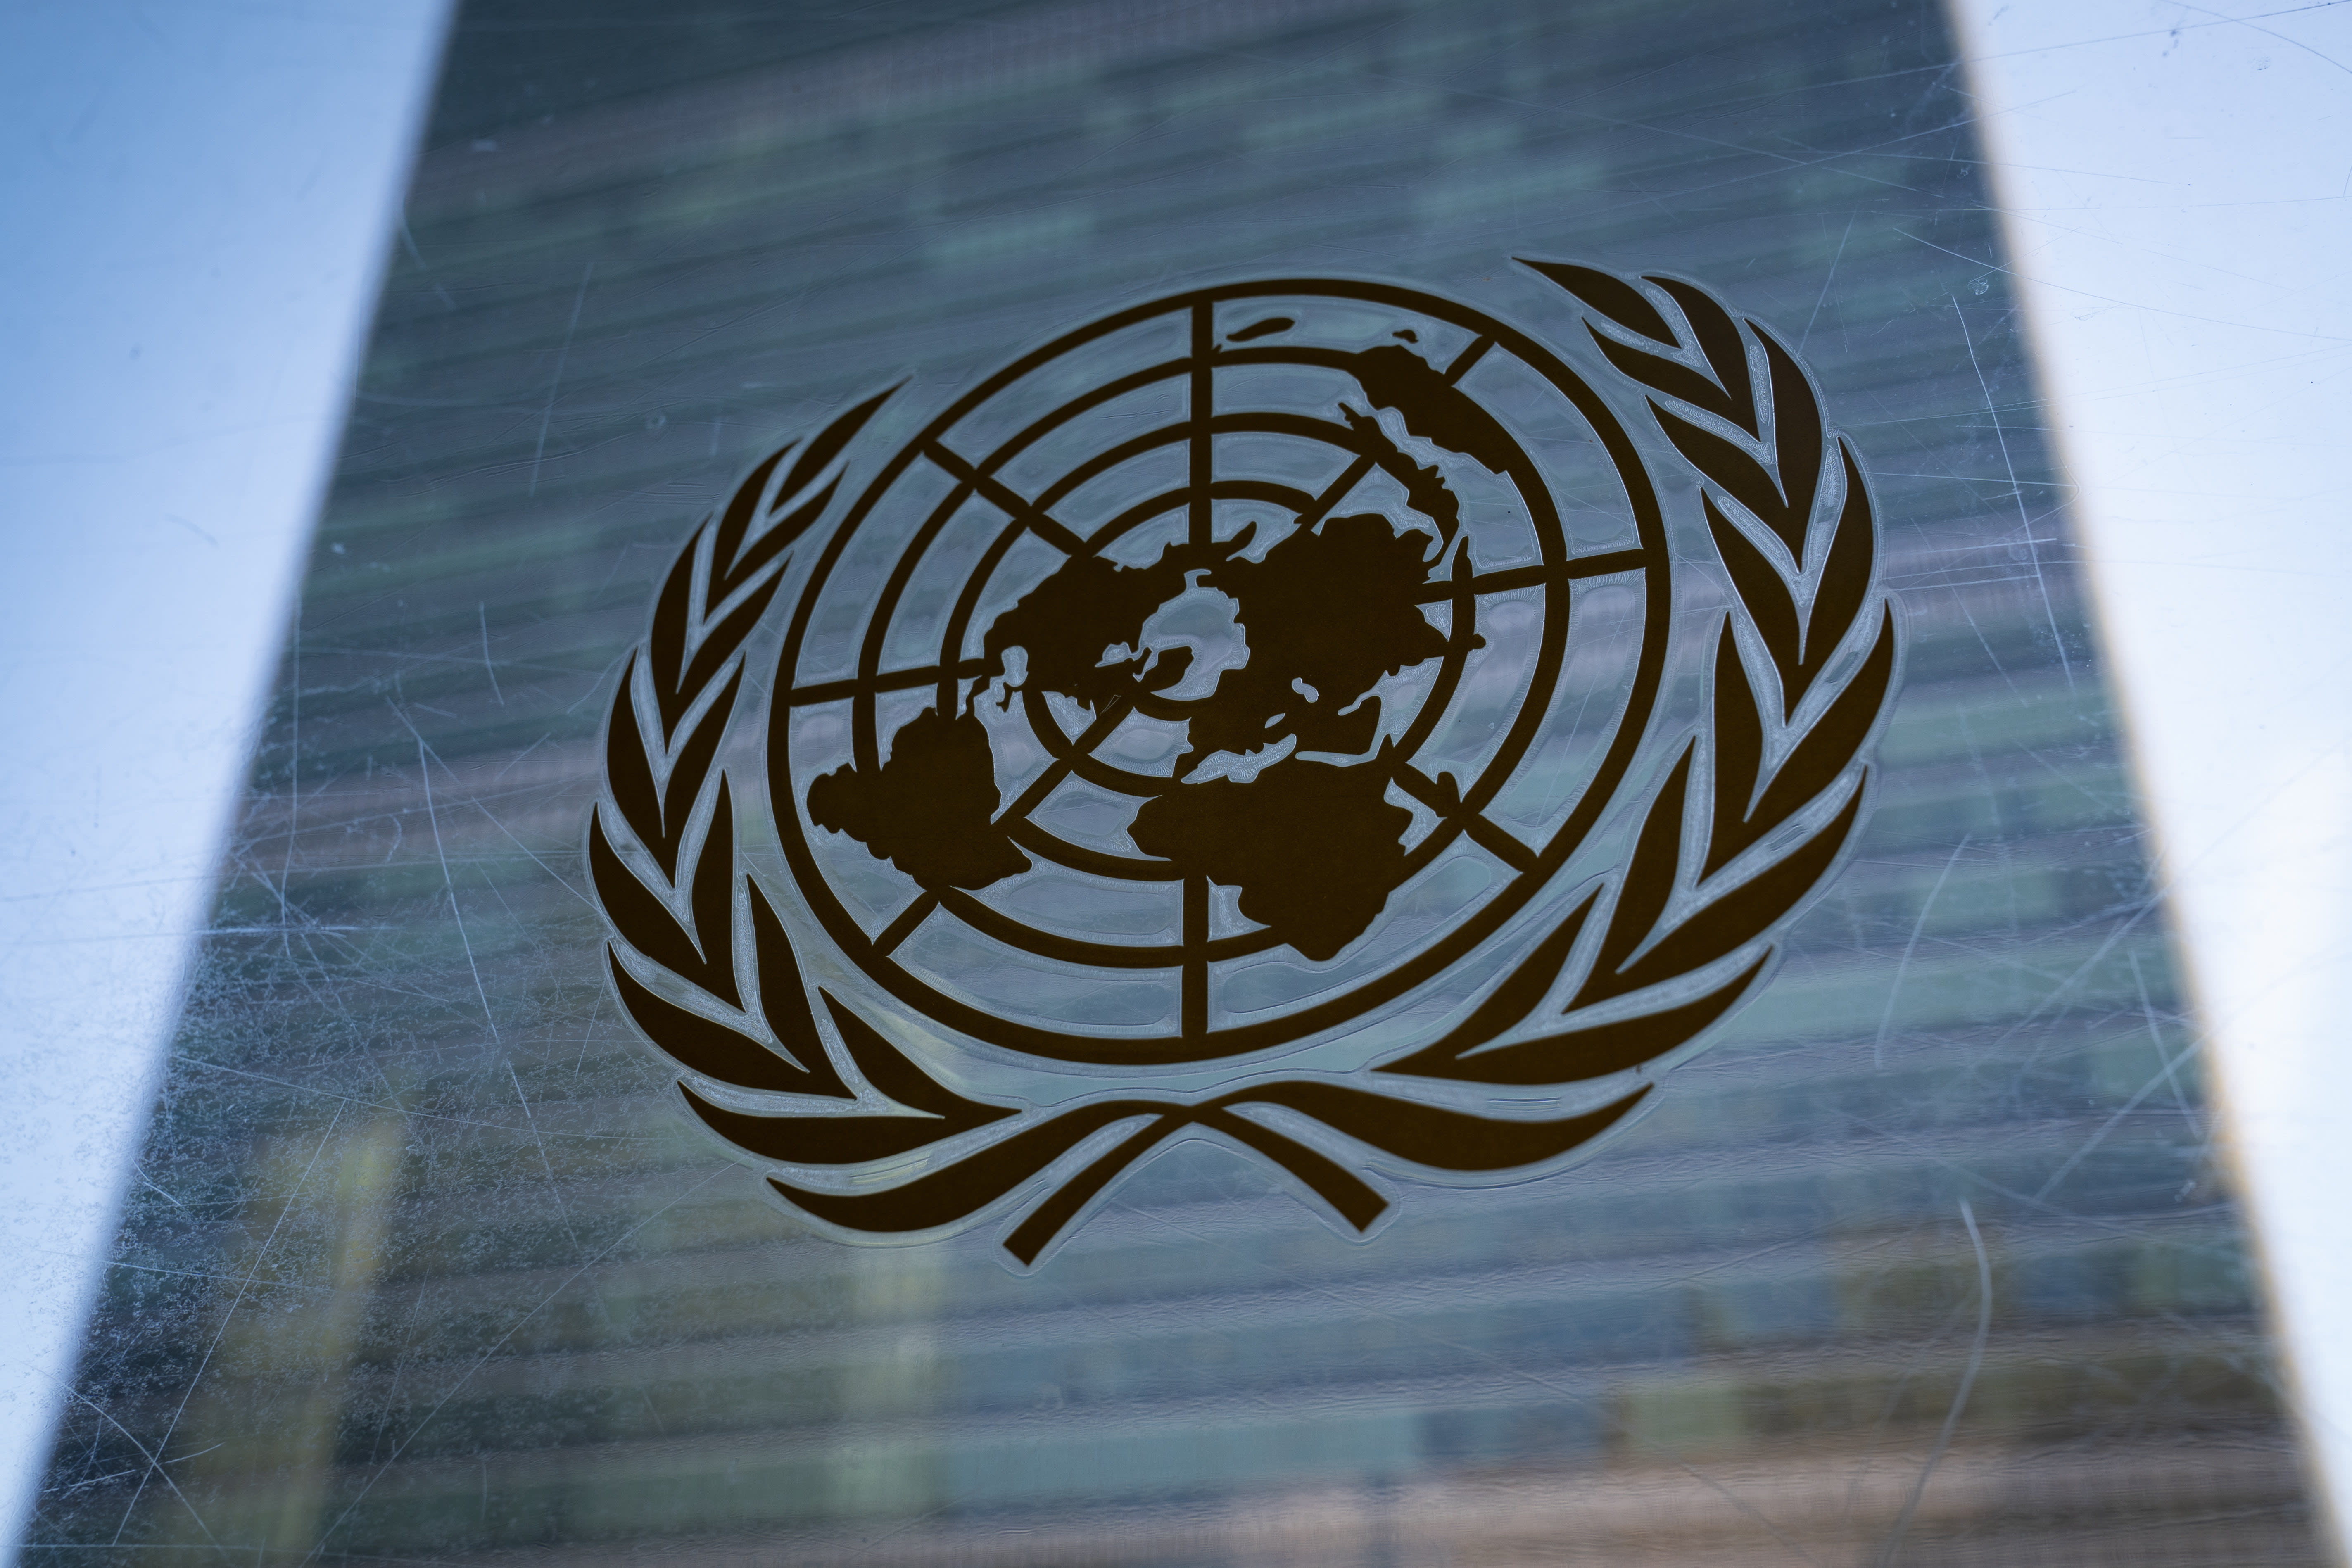 UN warns central banks against interest rate hikes